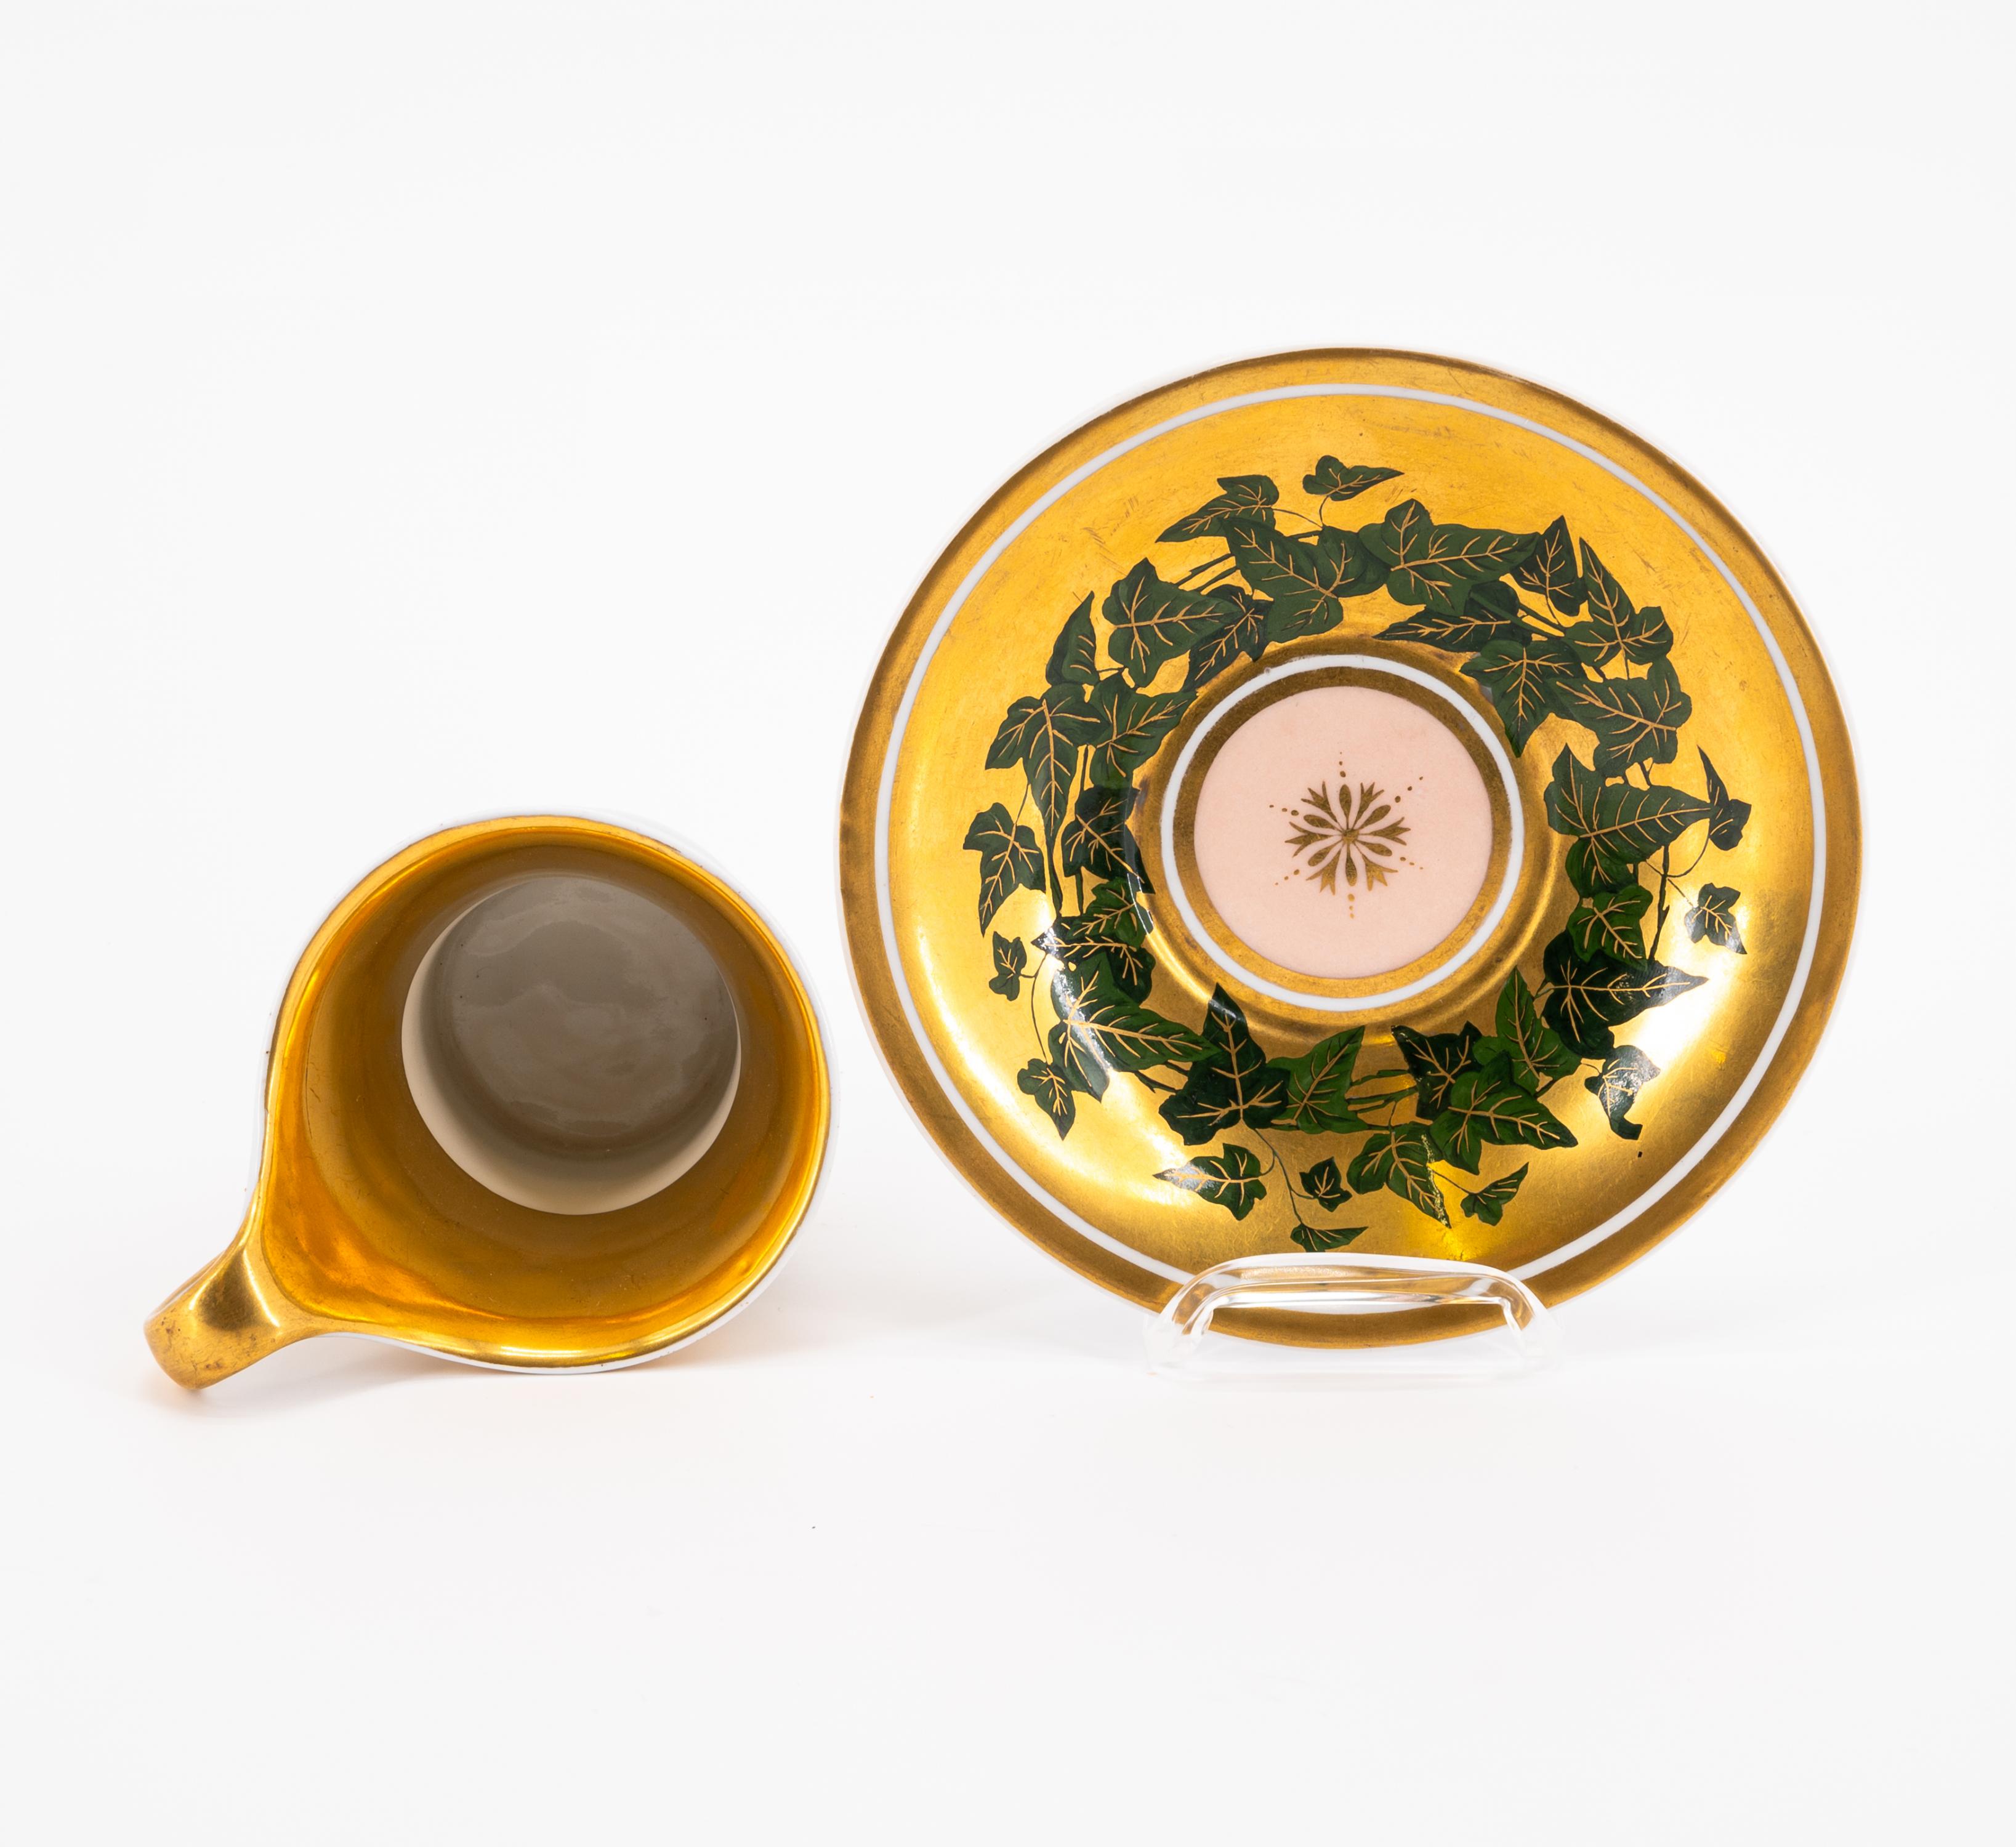 PORCELAIN CUP AND SAUCER WITH IVY AND INSCRIPTION "ERINNERUNG" - Image 5 of 6